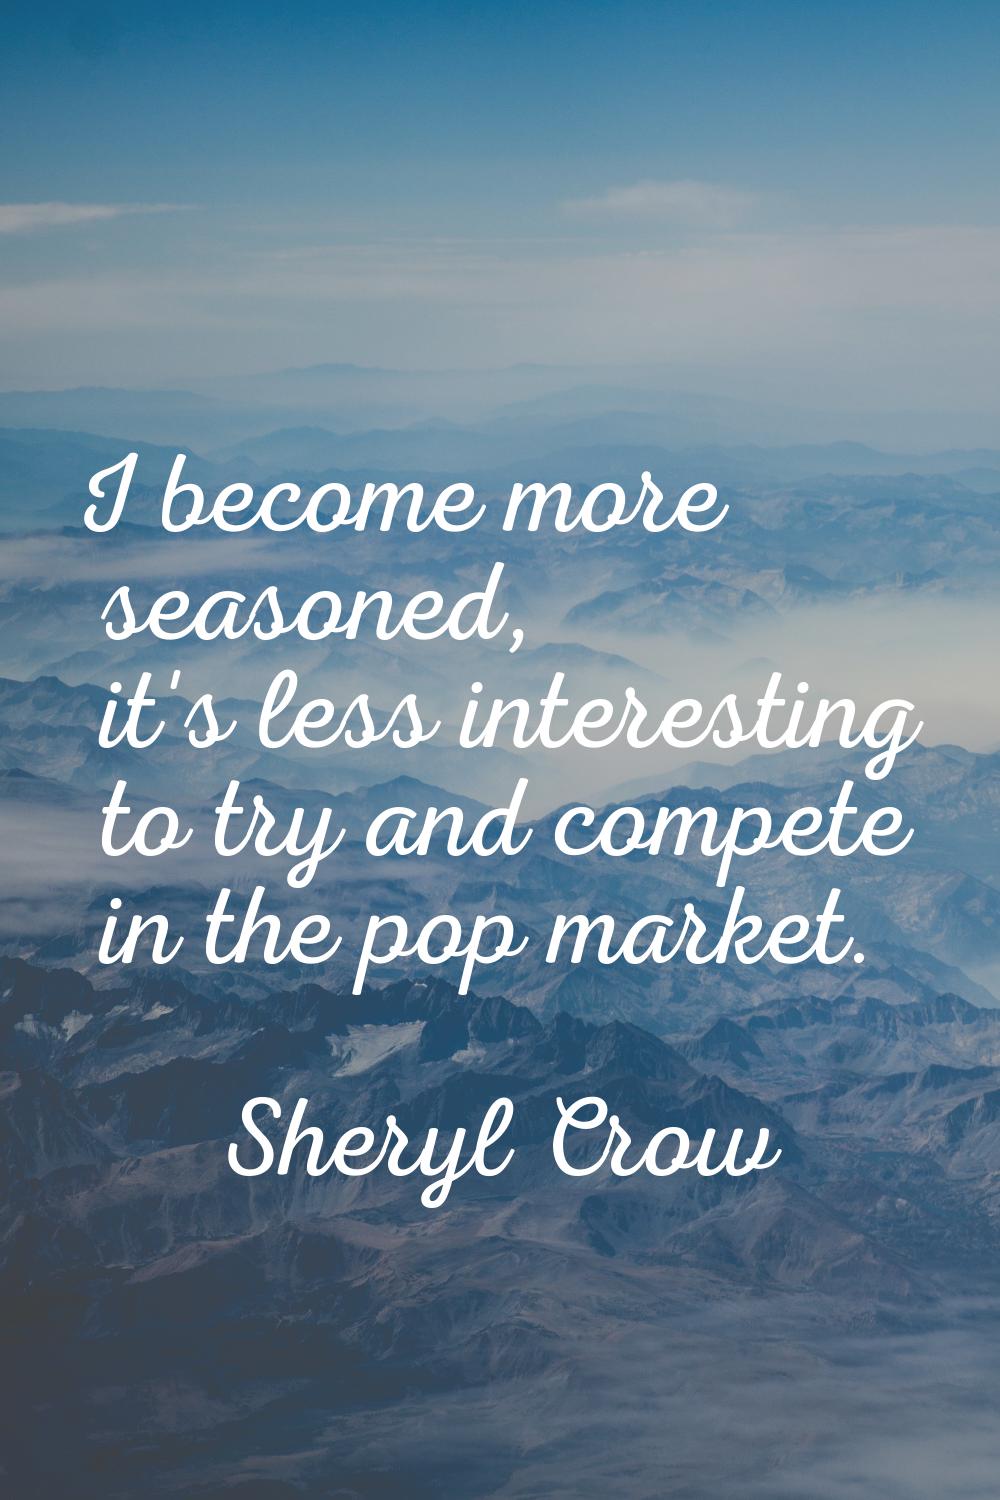 I become more seasoned, it's less interesting to try and compete in the pop market.